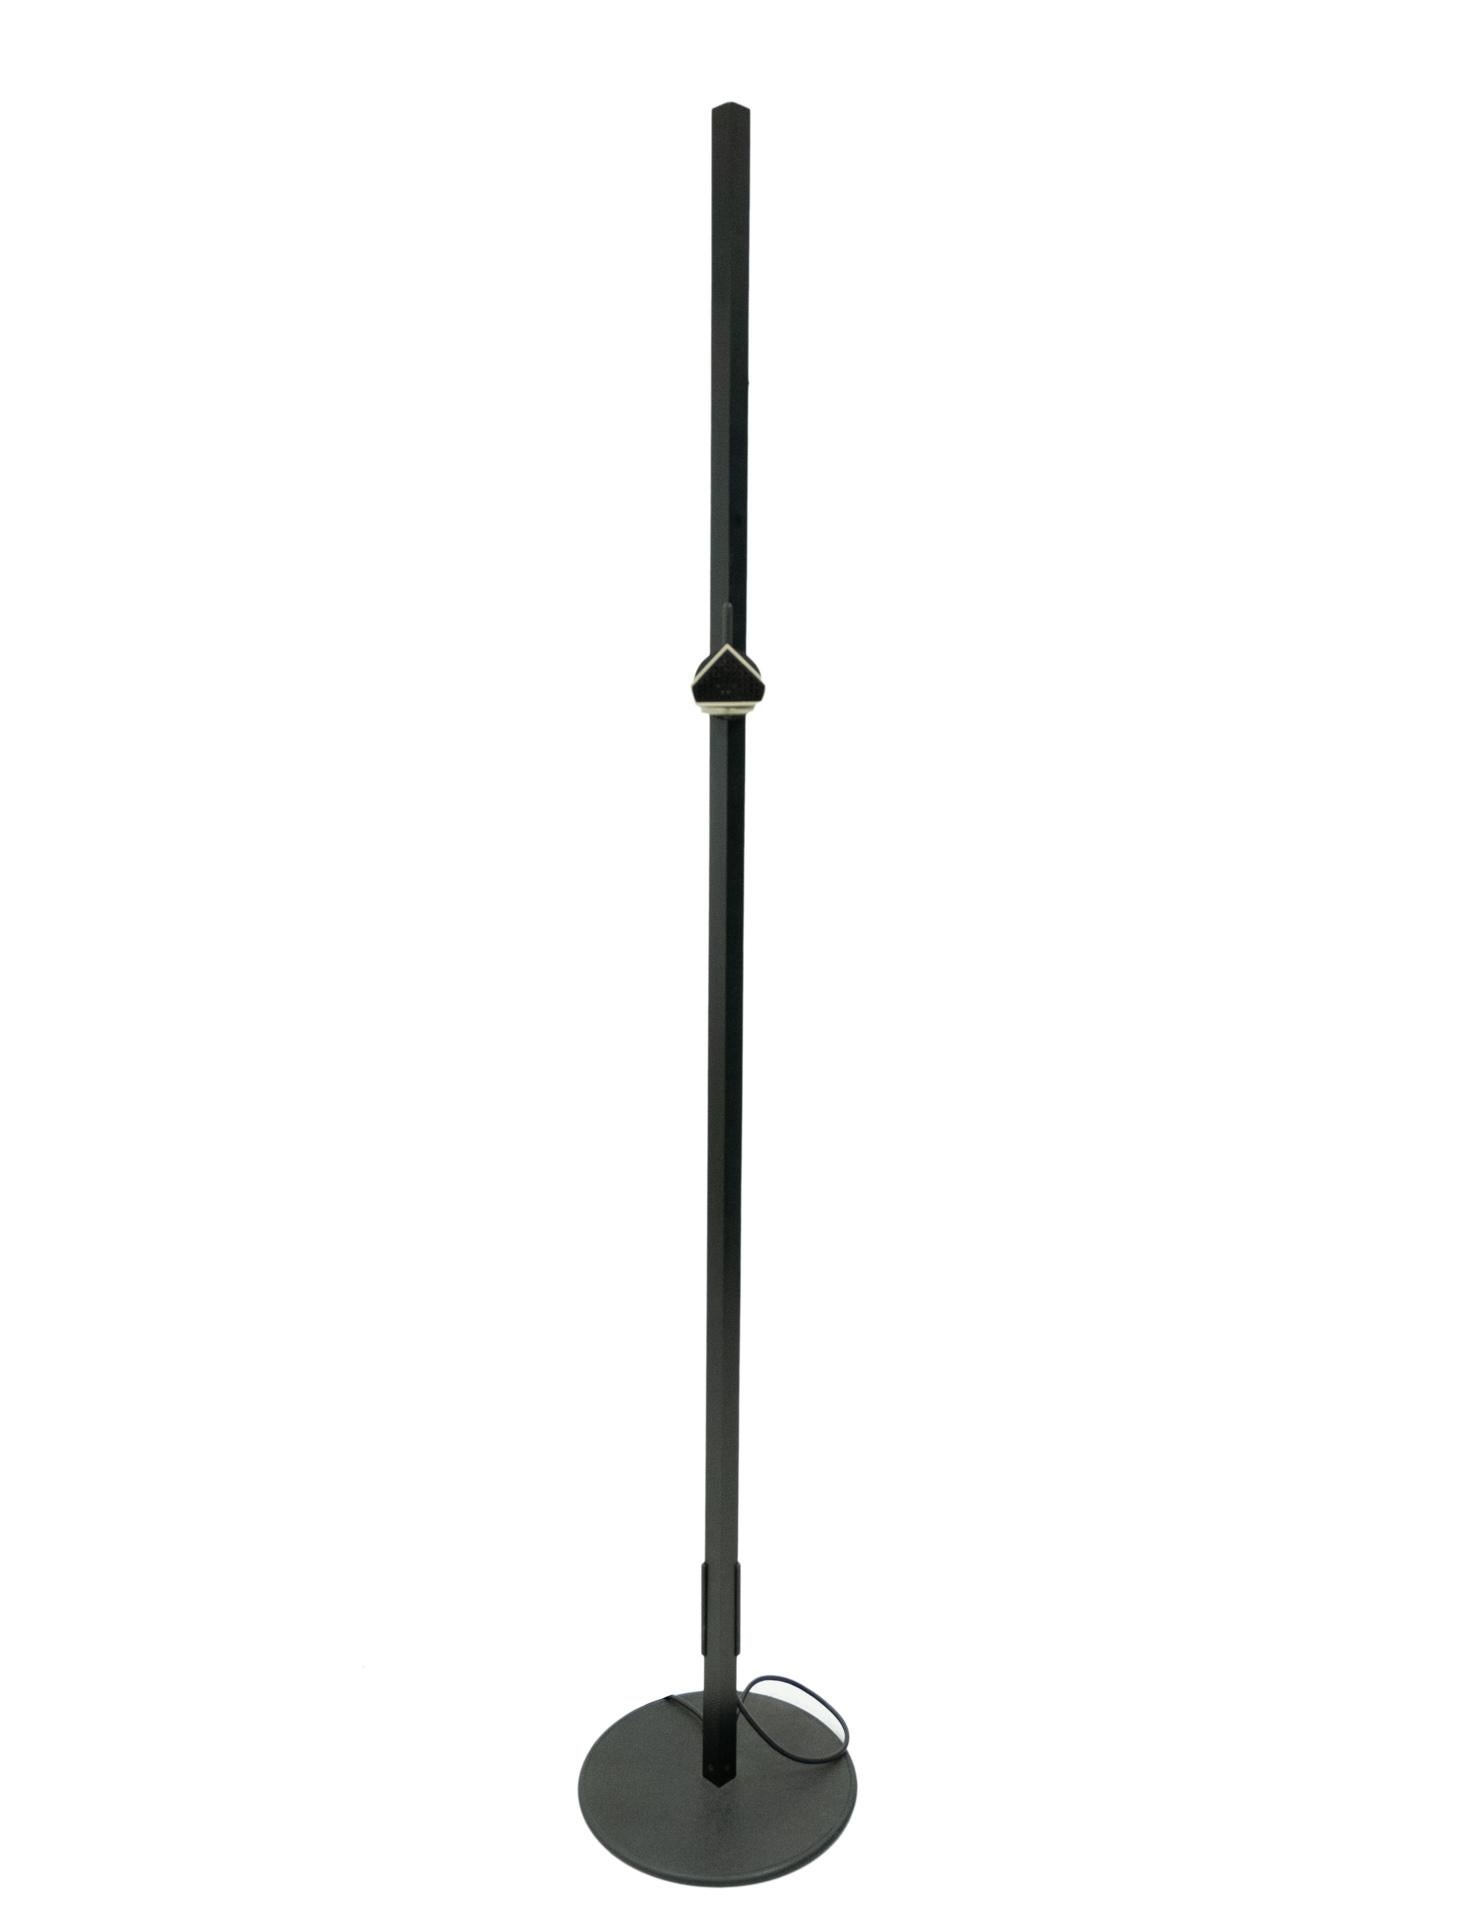 G.F. Frattini for Luci Caltha Adjustable Floor Lamp, Italy, 1982 In Good Condition For Sale In Den Haag, NL